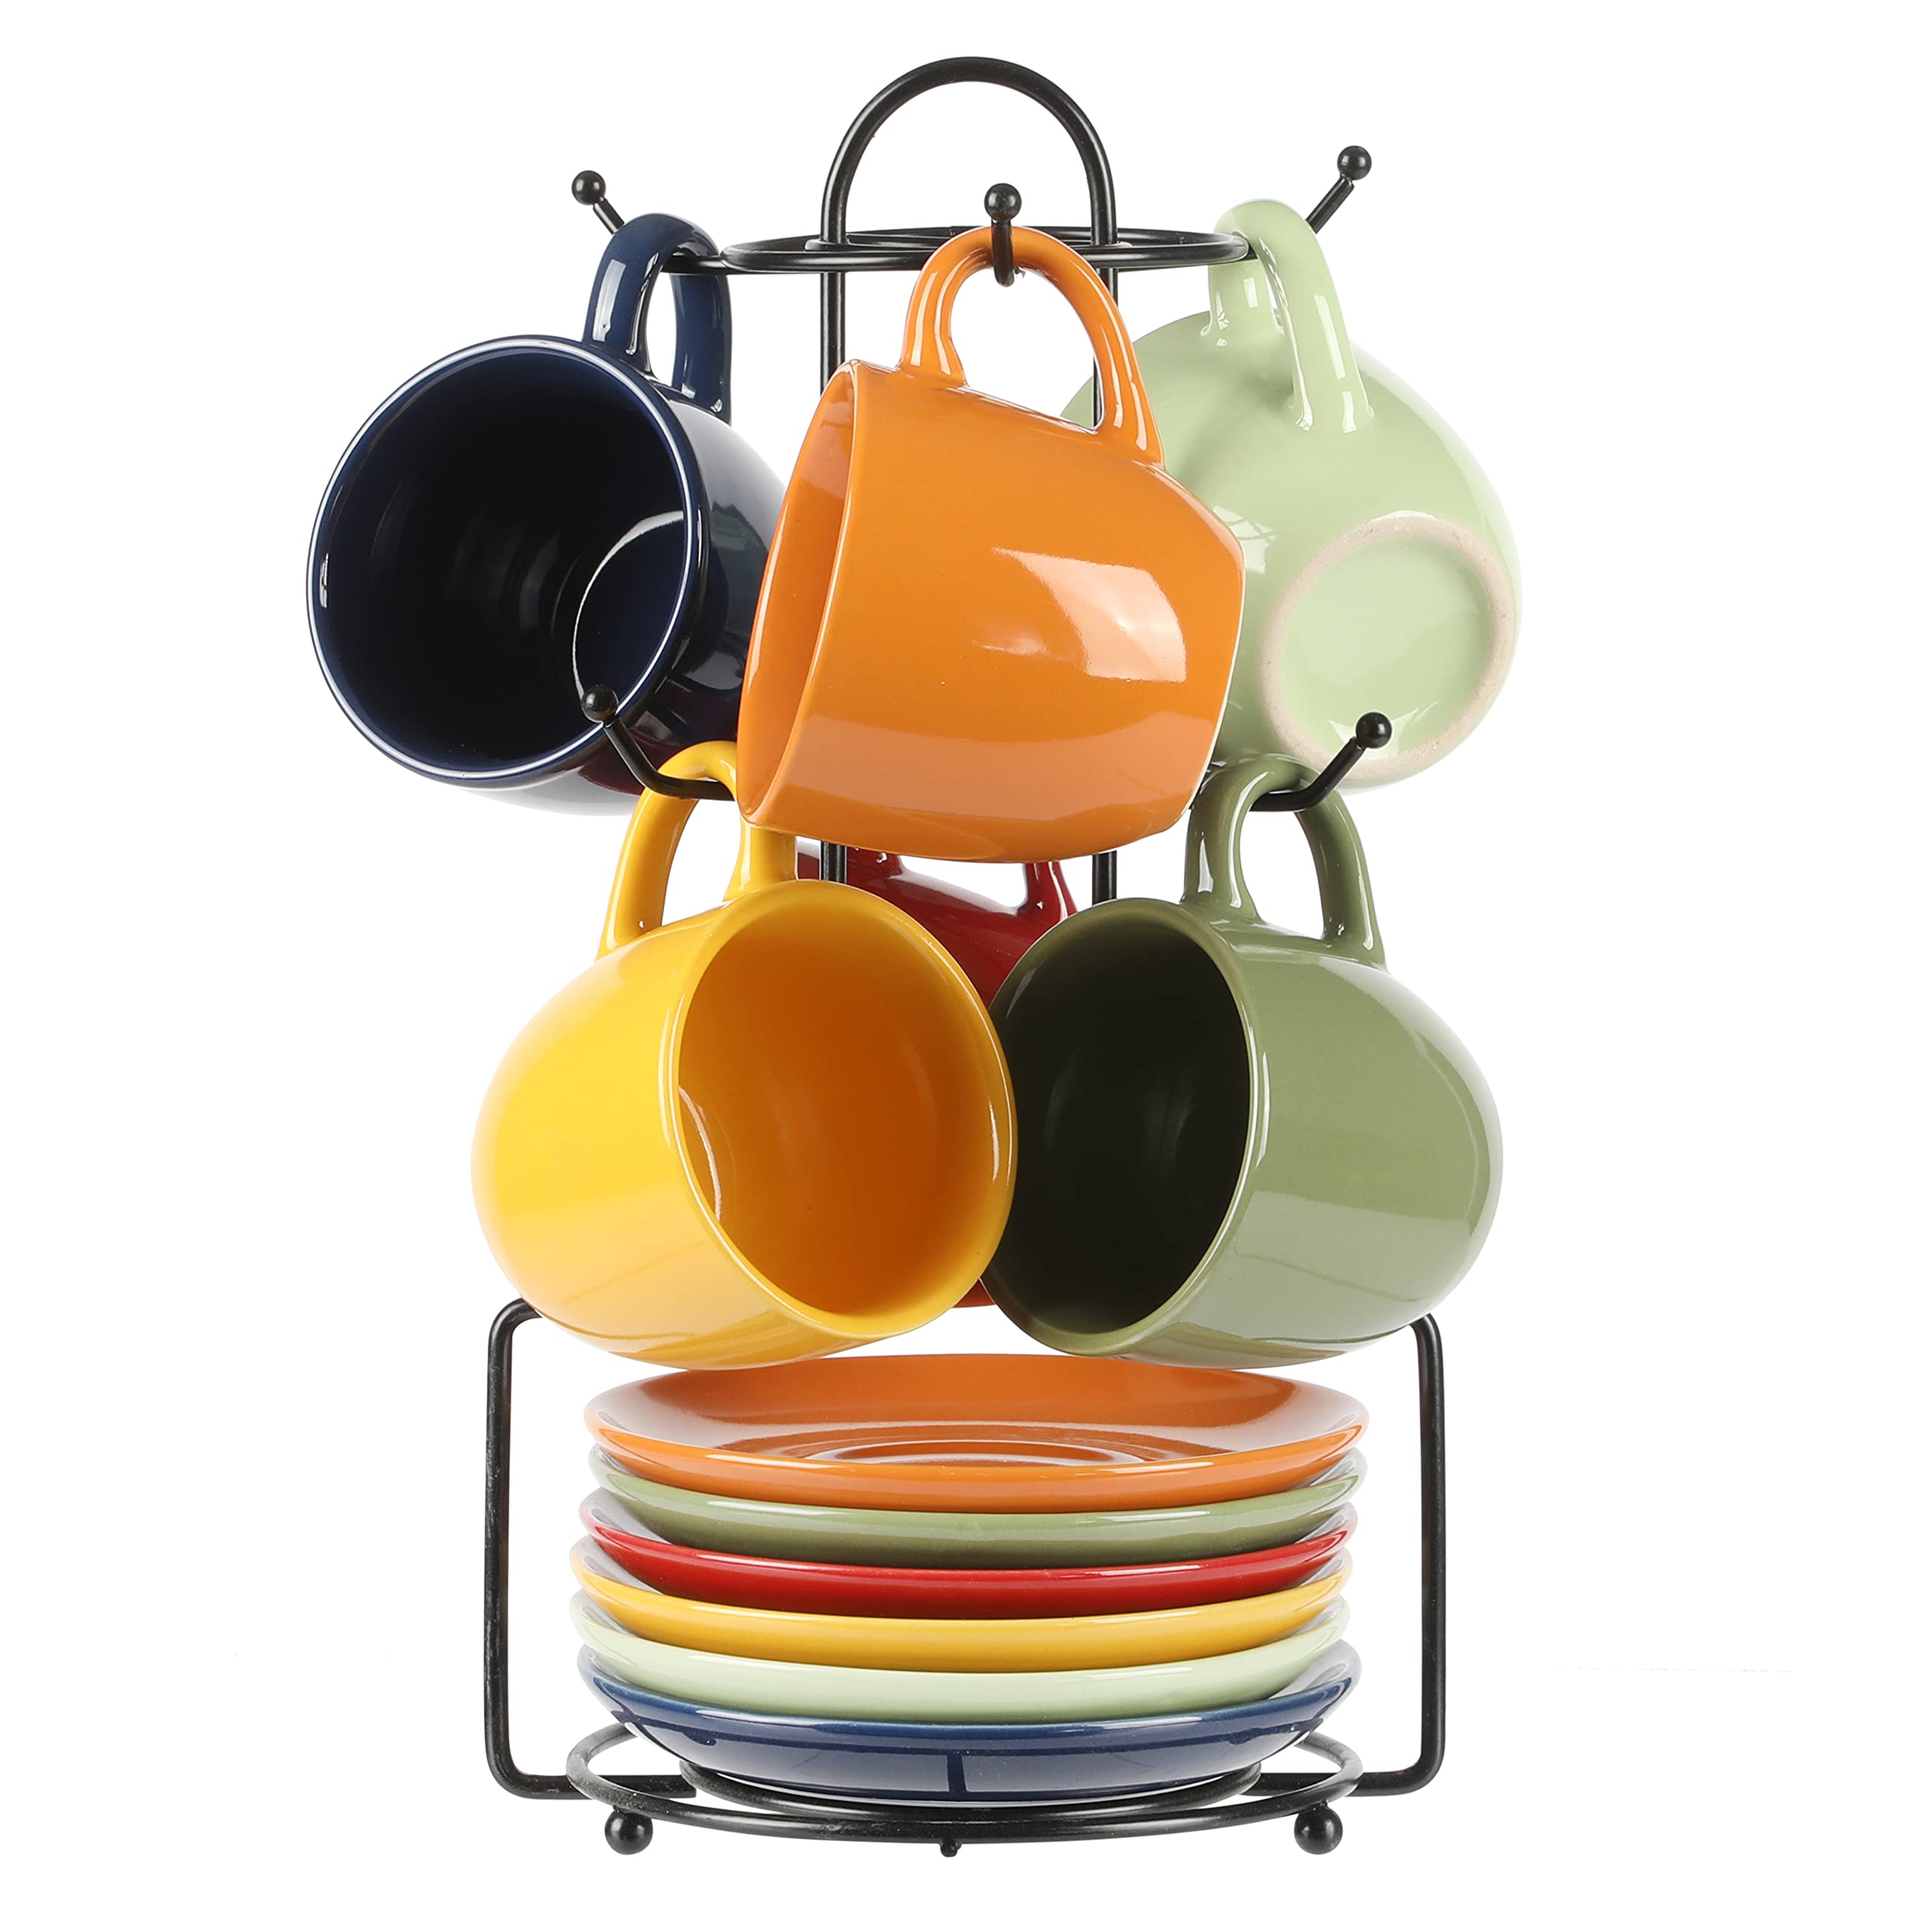 13-Piece Gibson Home Color Cafe Assorted Color Stoneware Mug Set w/ Metal Rack & Saucer Set $19.20 + Free Shipping w/ Prime or on $35+